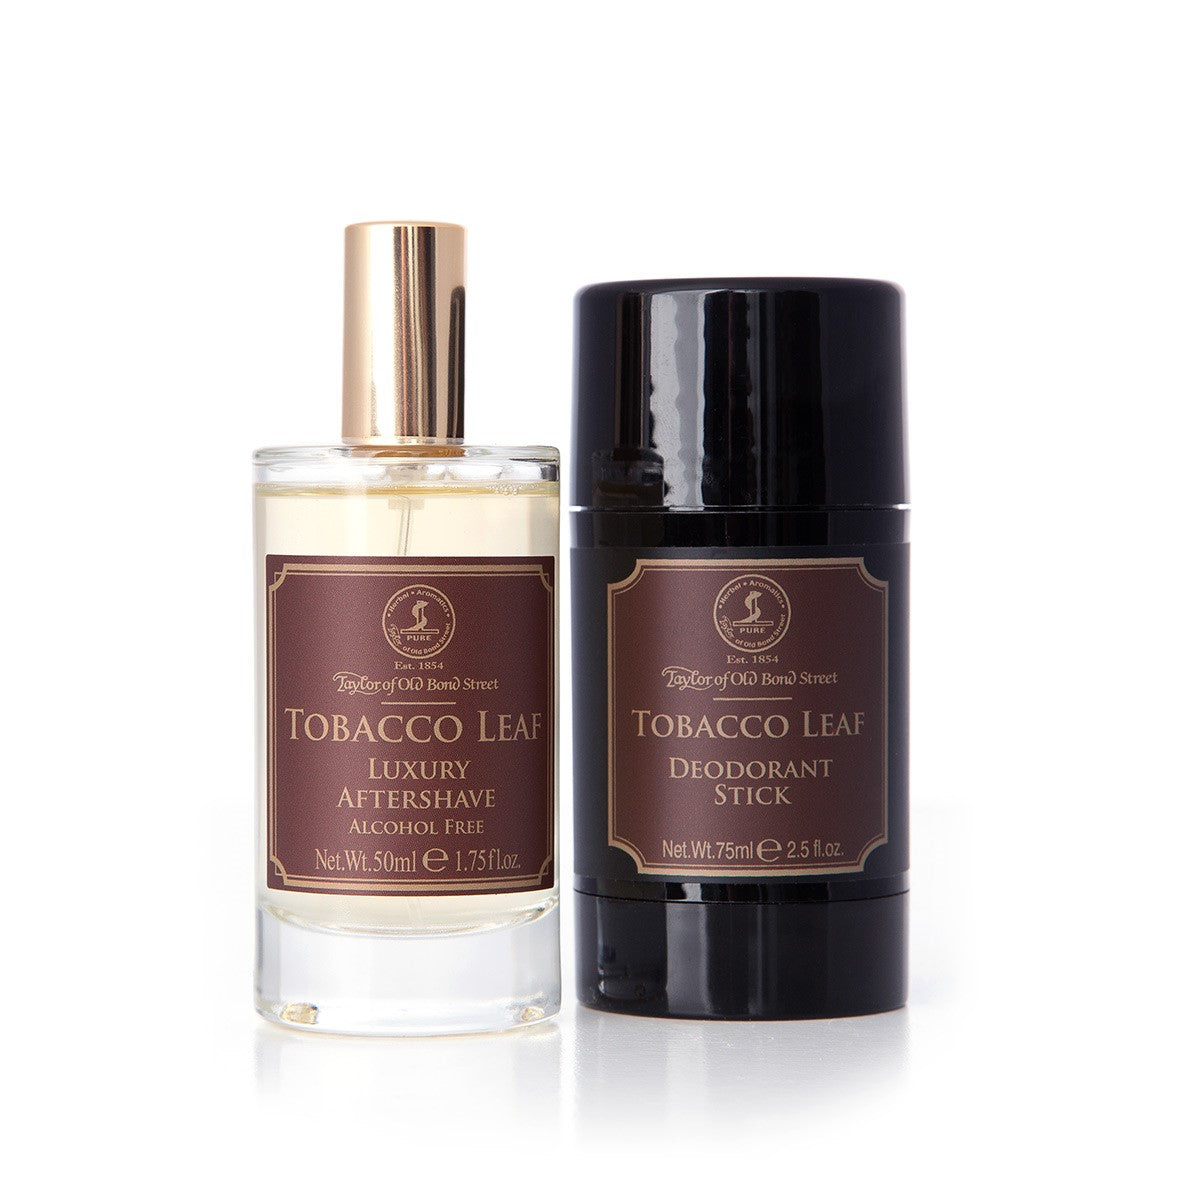 Tobacco Leaf Aftershave and Deodorant Gift Set